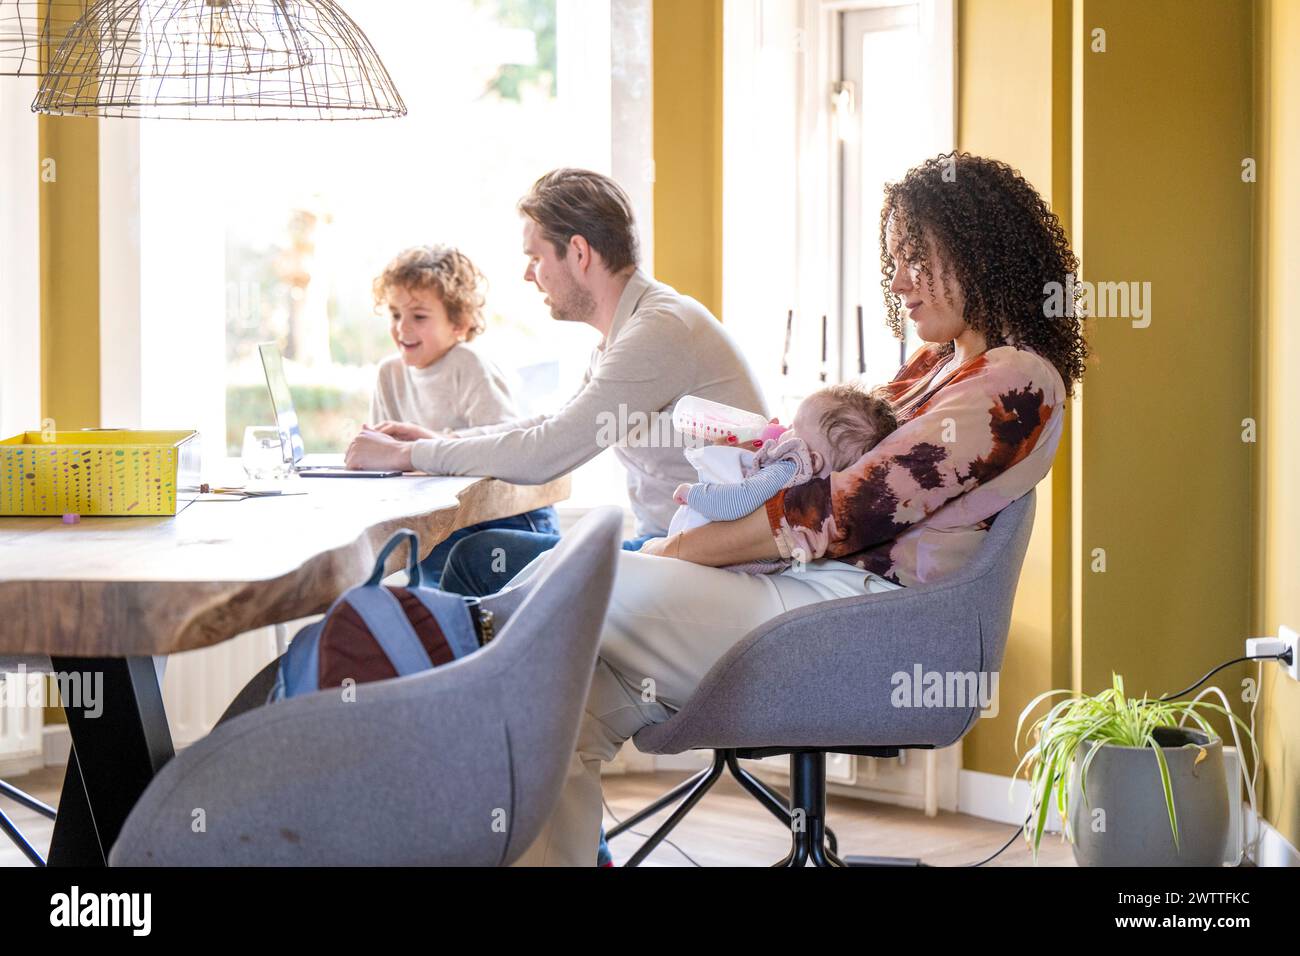 A cozy family moment at home with a mother breastfeeding and a father helping another child with homework. Stock Photo